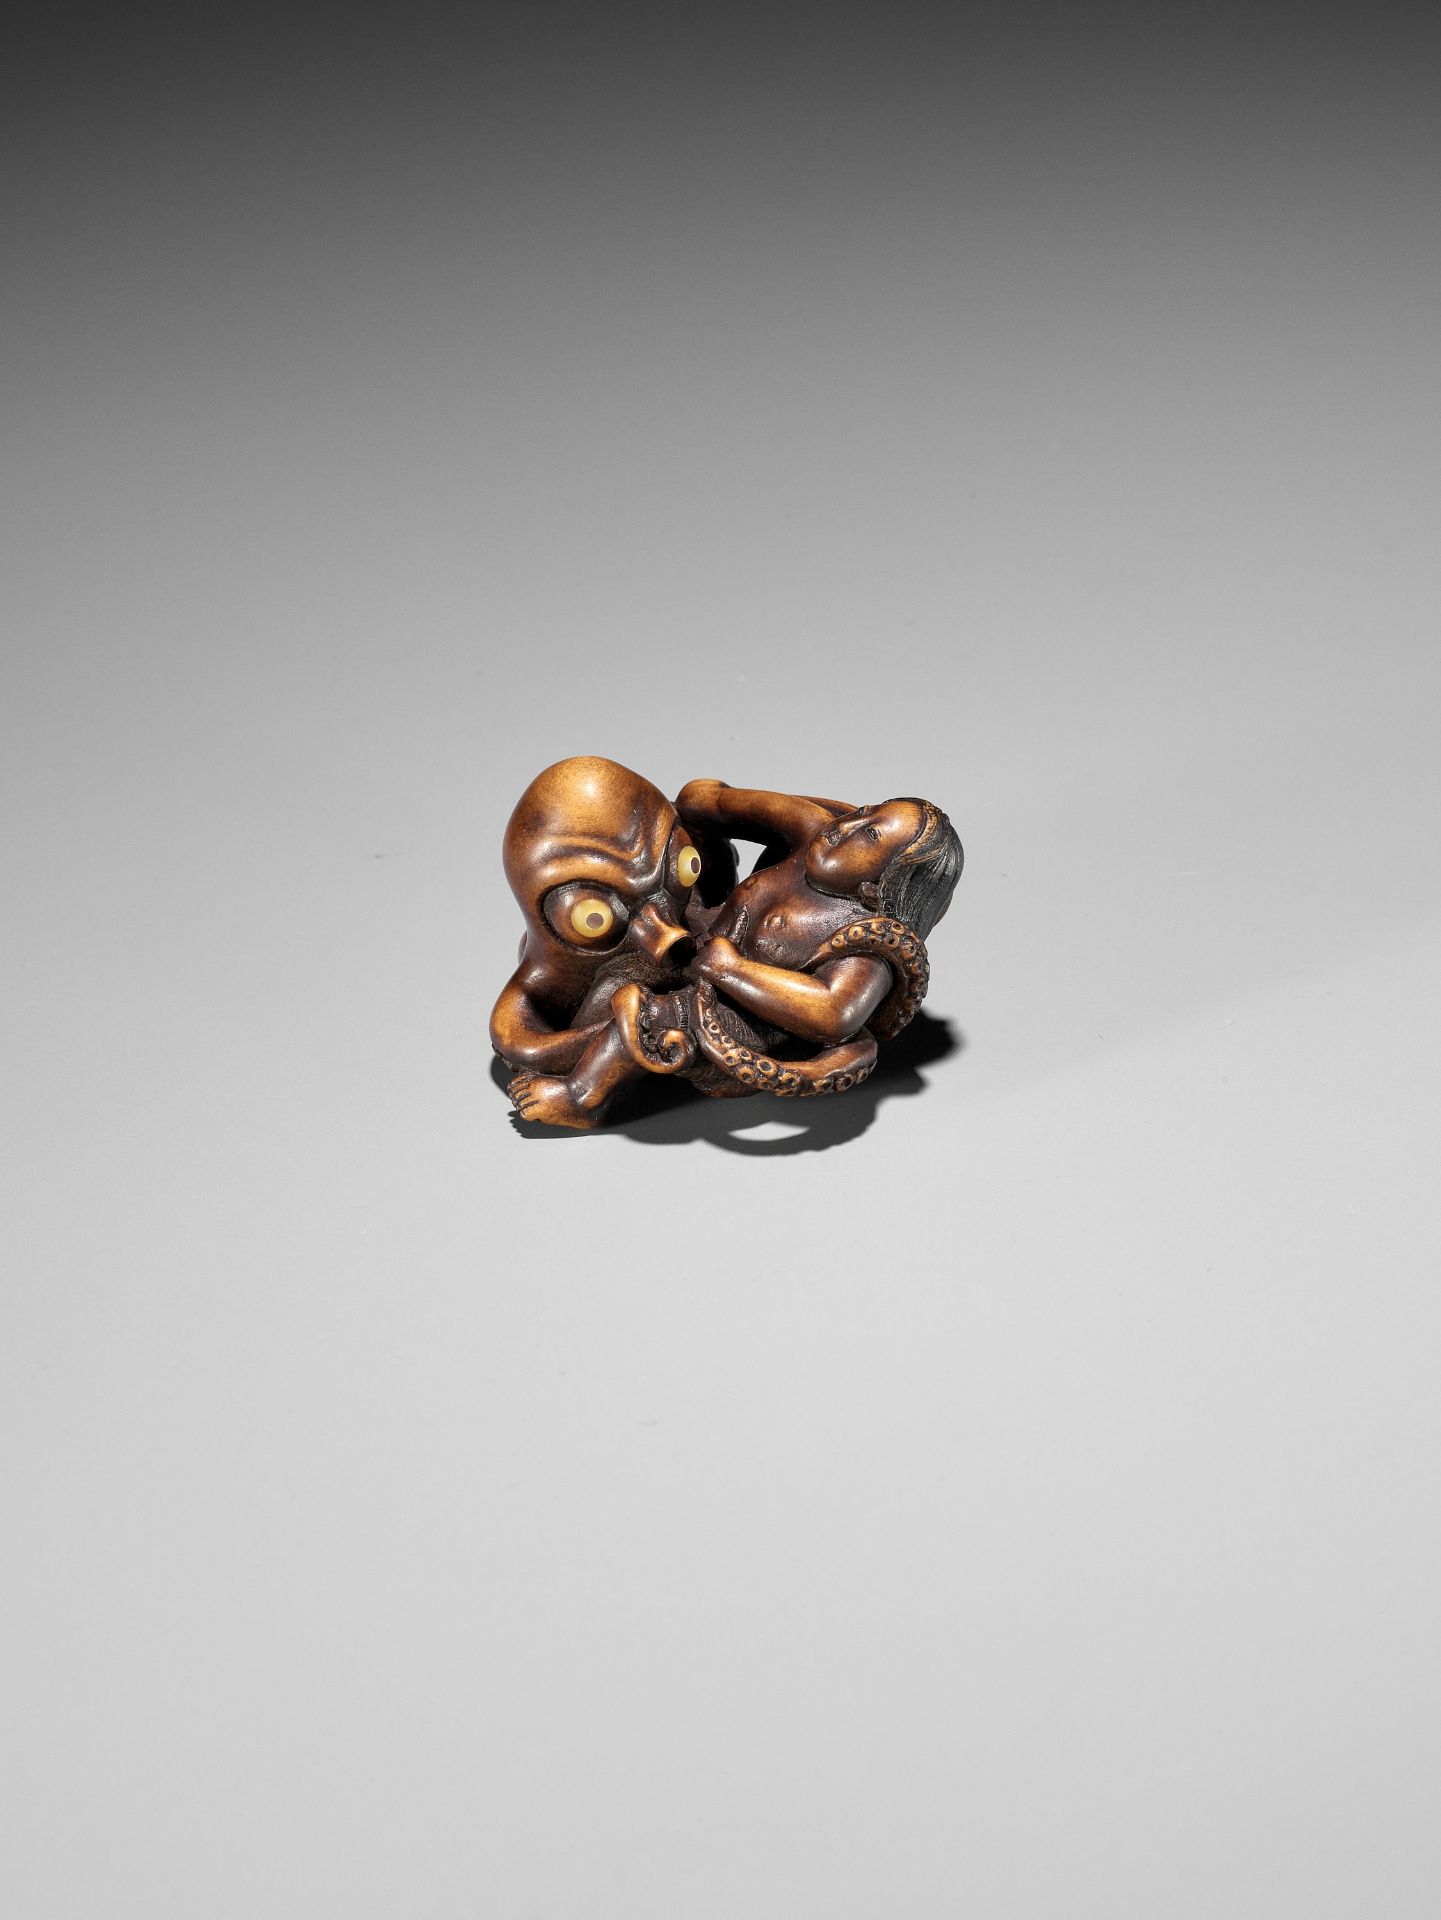 A SUPERB WOOD NETSUKE OF AN AMA STRUGGLING WITH AN OCTOPUS, ATTRIBUTED TO IKKYU - Image 13 of 16